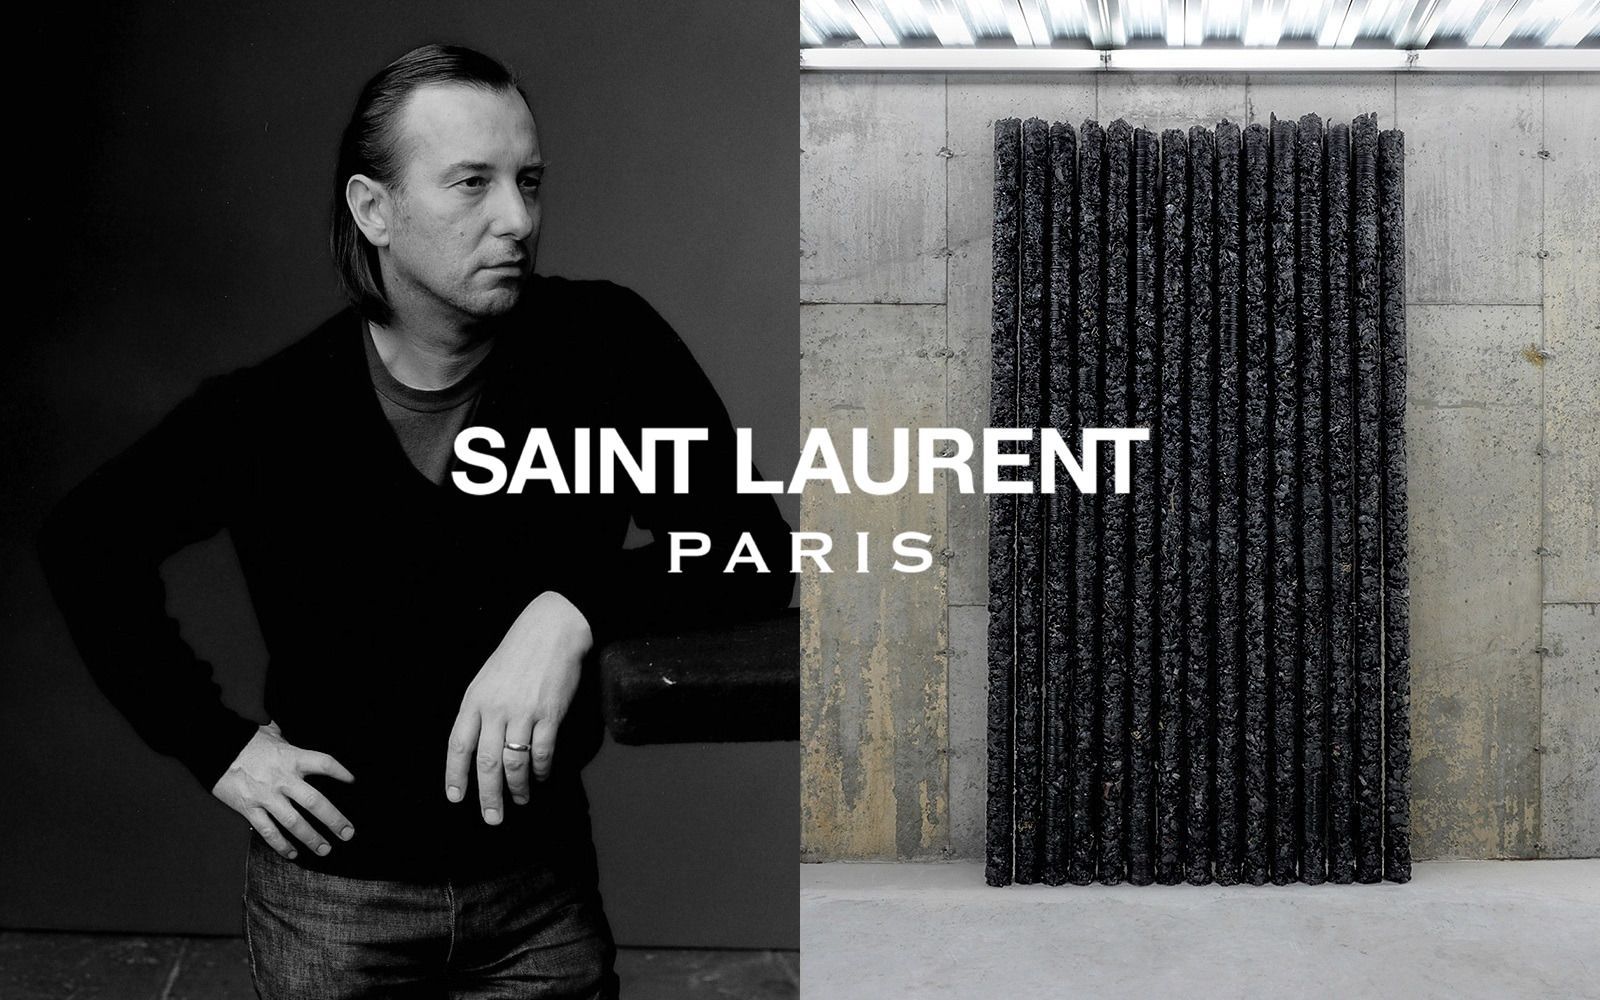 Helmut Lang on Turning His Fashion Archive into Sculpture